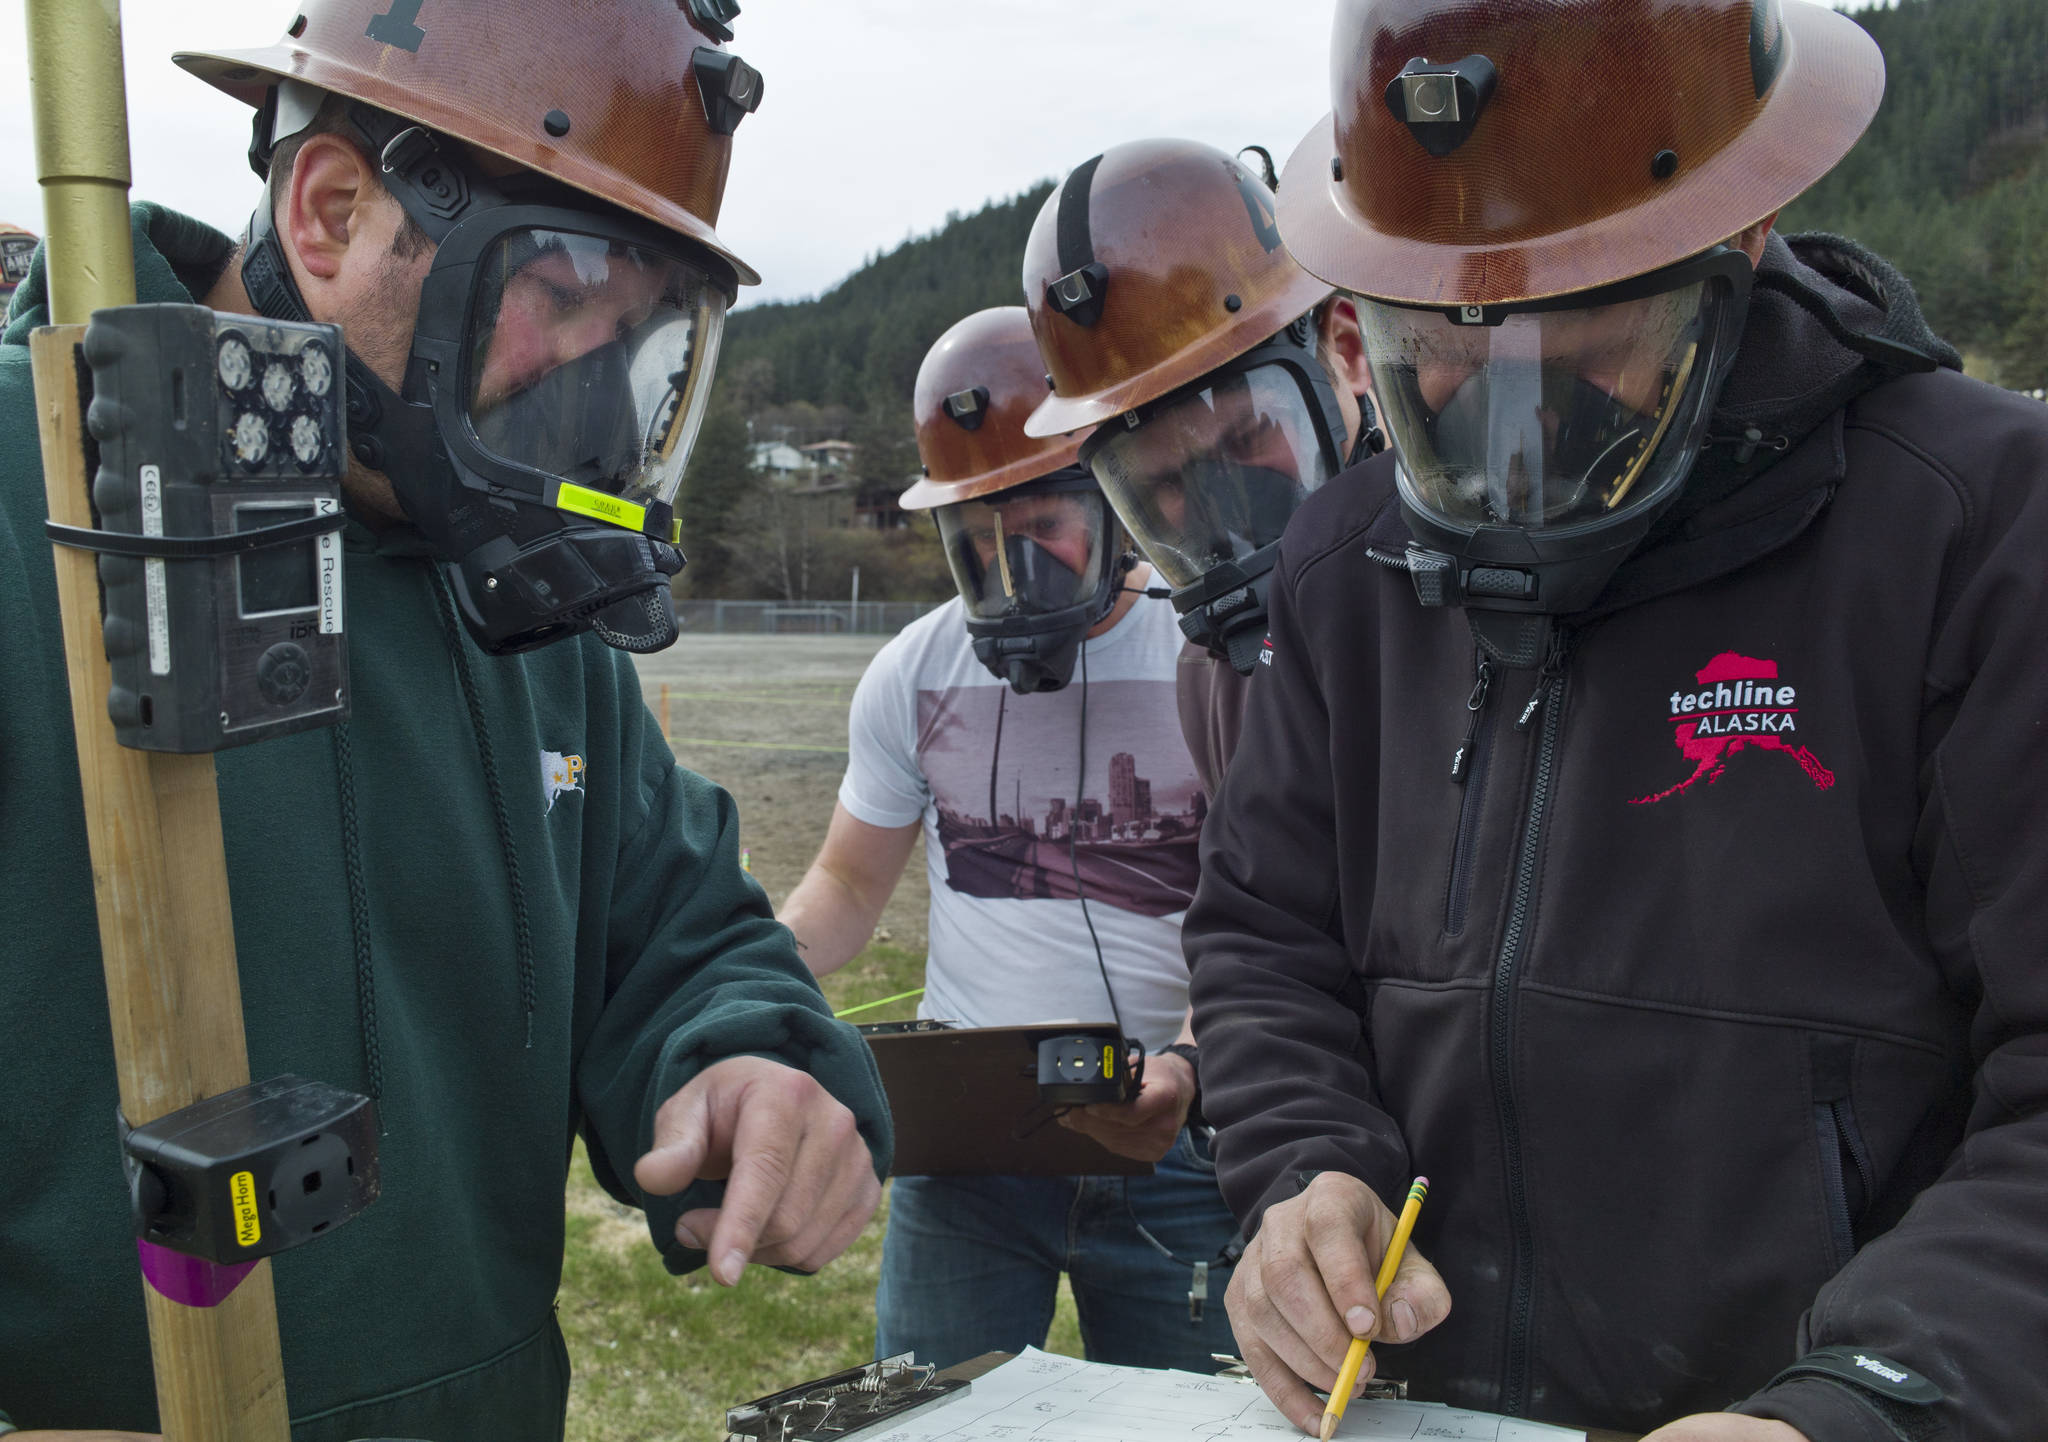 Eddie Petrie, left, talk with Mike Walters, right, as Jason Cameron and Alan Gordon, listen during Coeur’s Kensington Mine Rescue team practice at Savikko Park on Tuesday, May 2, 2017. The Kensington team and one from Hecla’s Green Creek Mine will compete next week at the Central Mine Rescue Competition in Kellogg, Idaho. (Michael Penn | Juneau Empire)